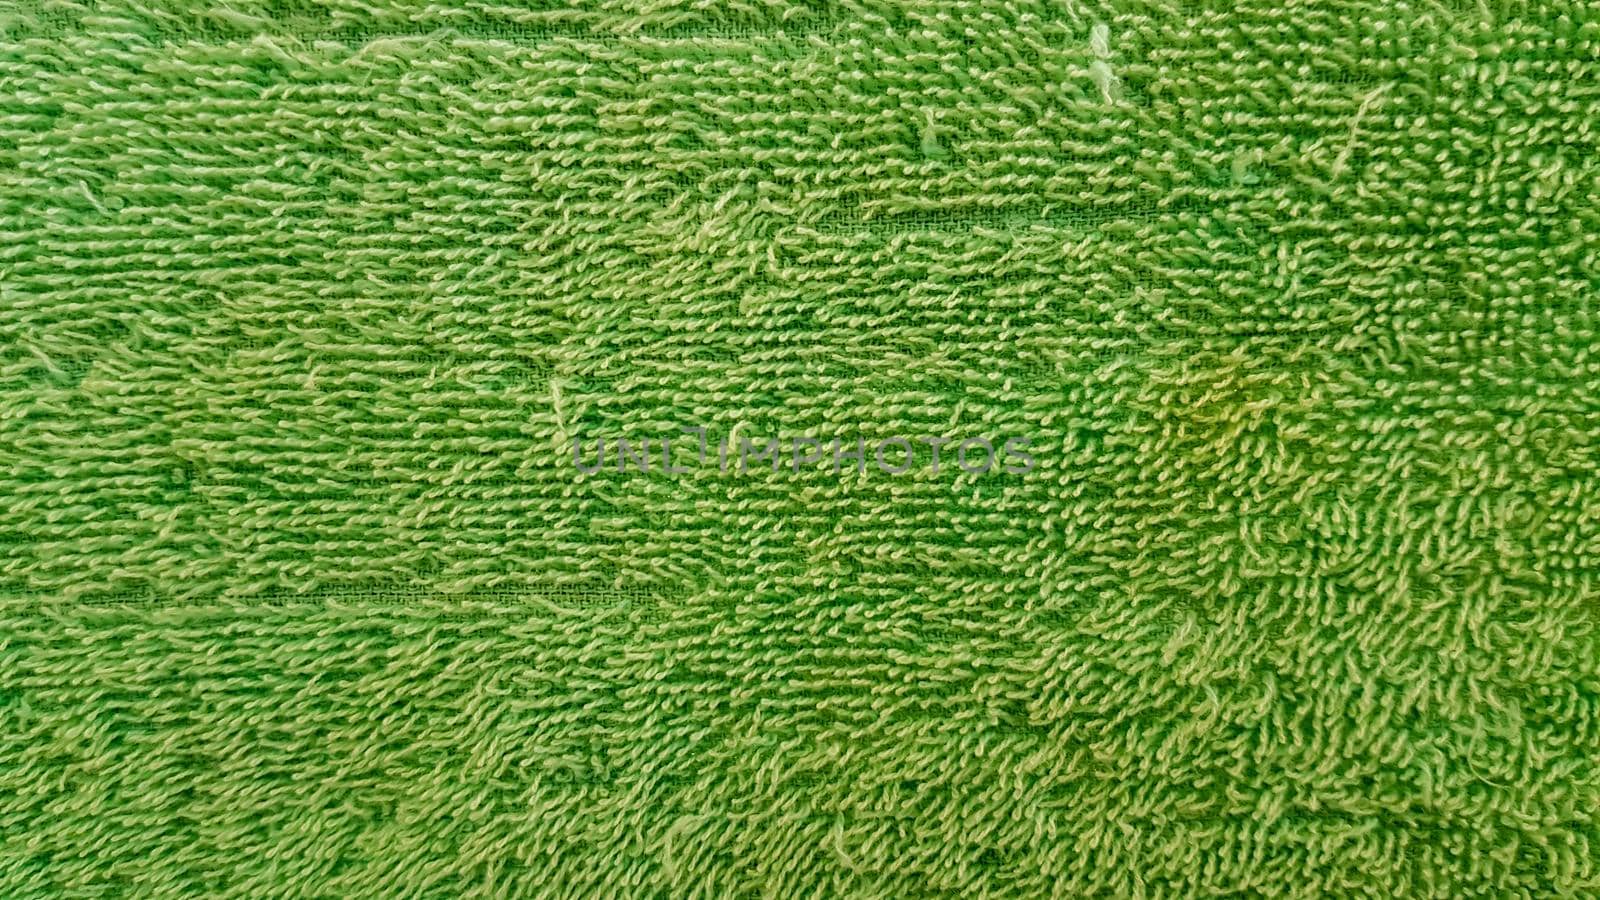 green old towel texture for background The fabric or textile is made up of cotton fiber material, looks fluffy, dry, soft.